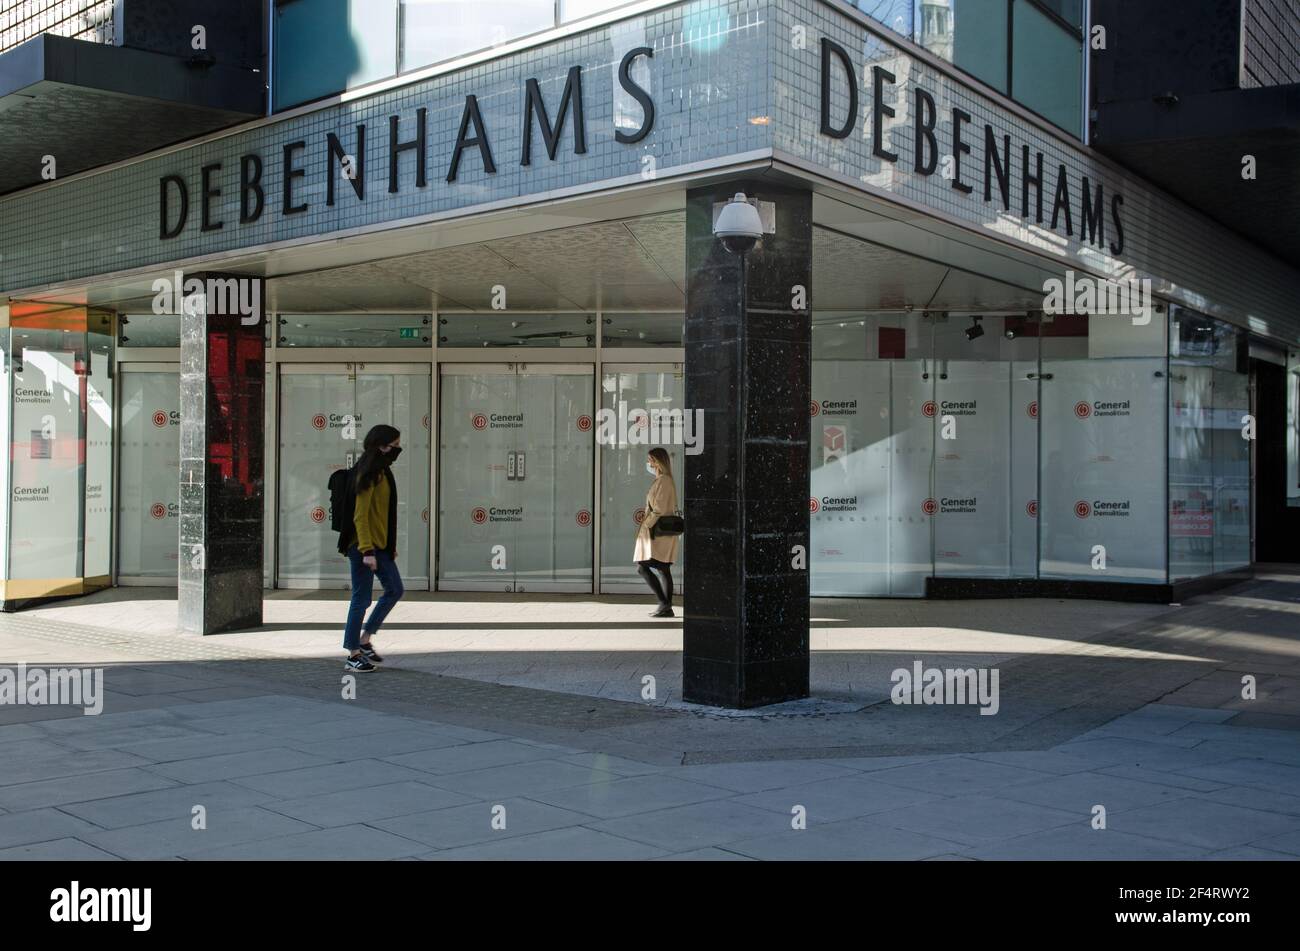 London, UK - February 26, 2021: Two pedestrians, each wearing face masks walking past the closed doors of the now defunct flagship store of the Debenh Stock Photo